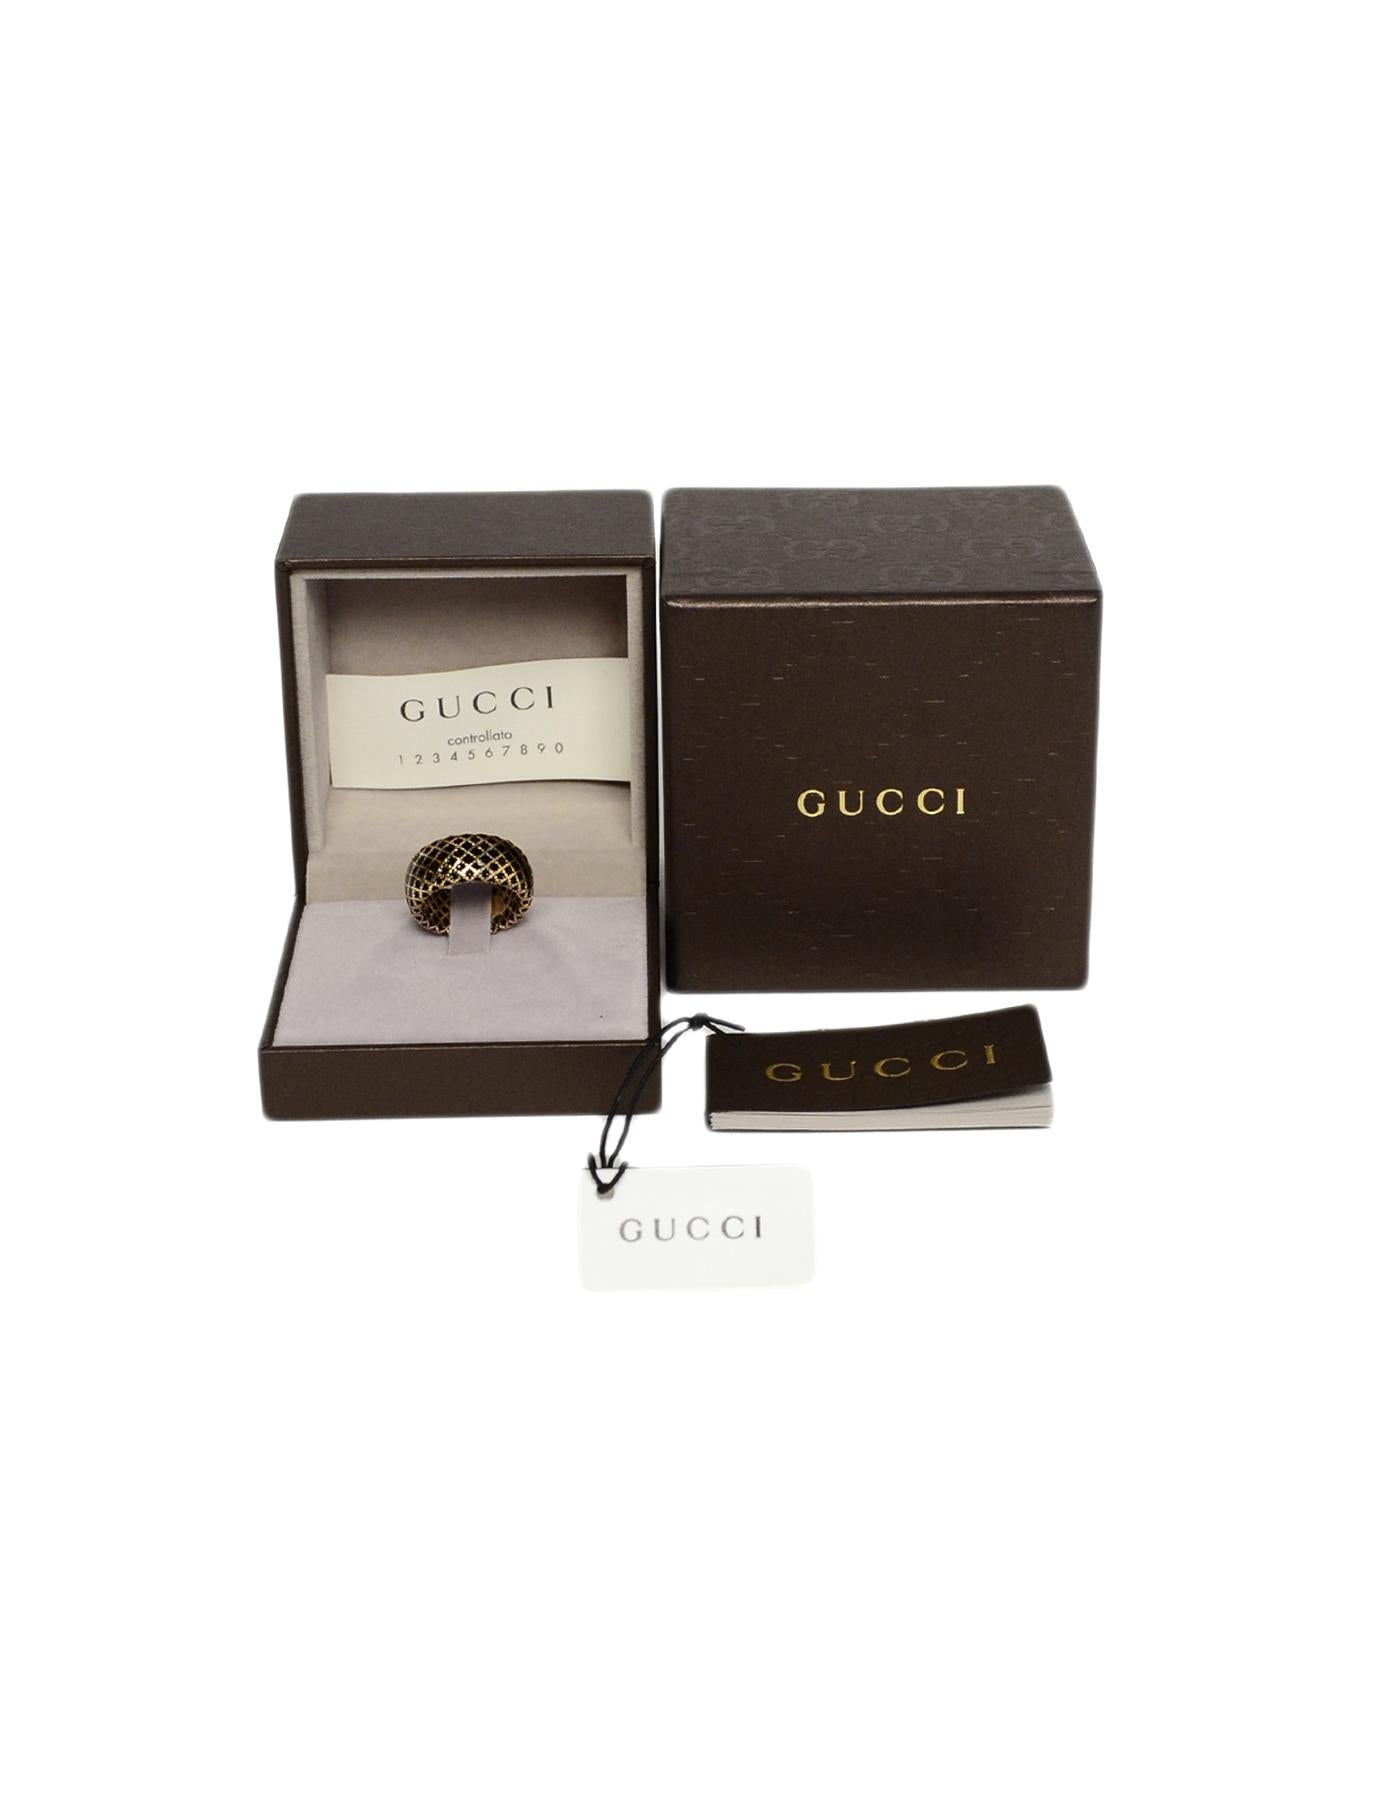 Gucci 18K Yellow Gold/Black Enamel Diamantissima Ring sz 7.25 rt $995 In Excellent Condition In New York, NY